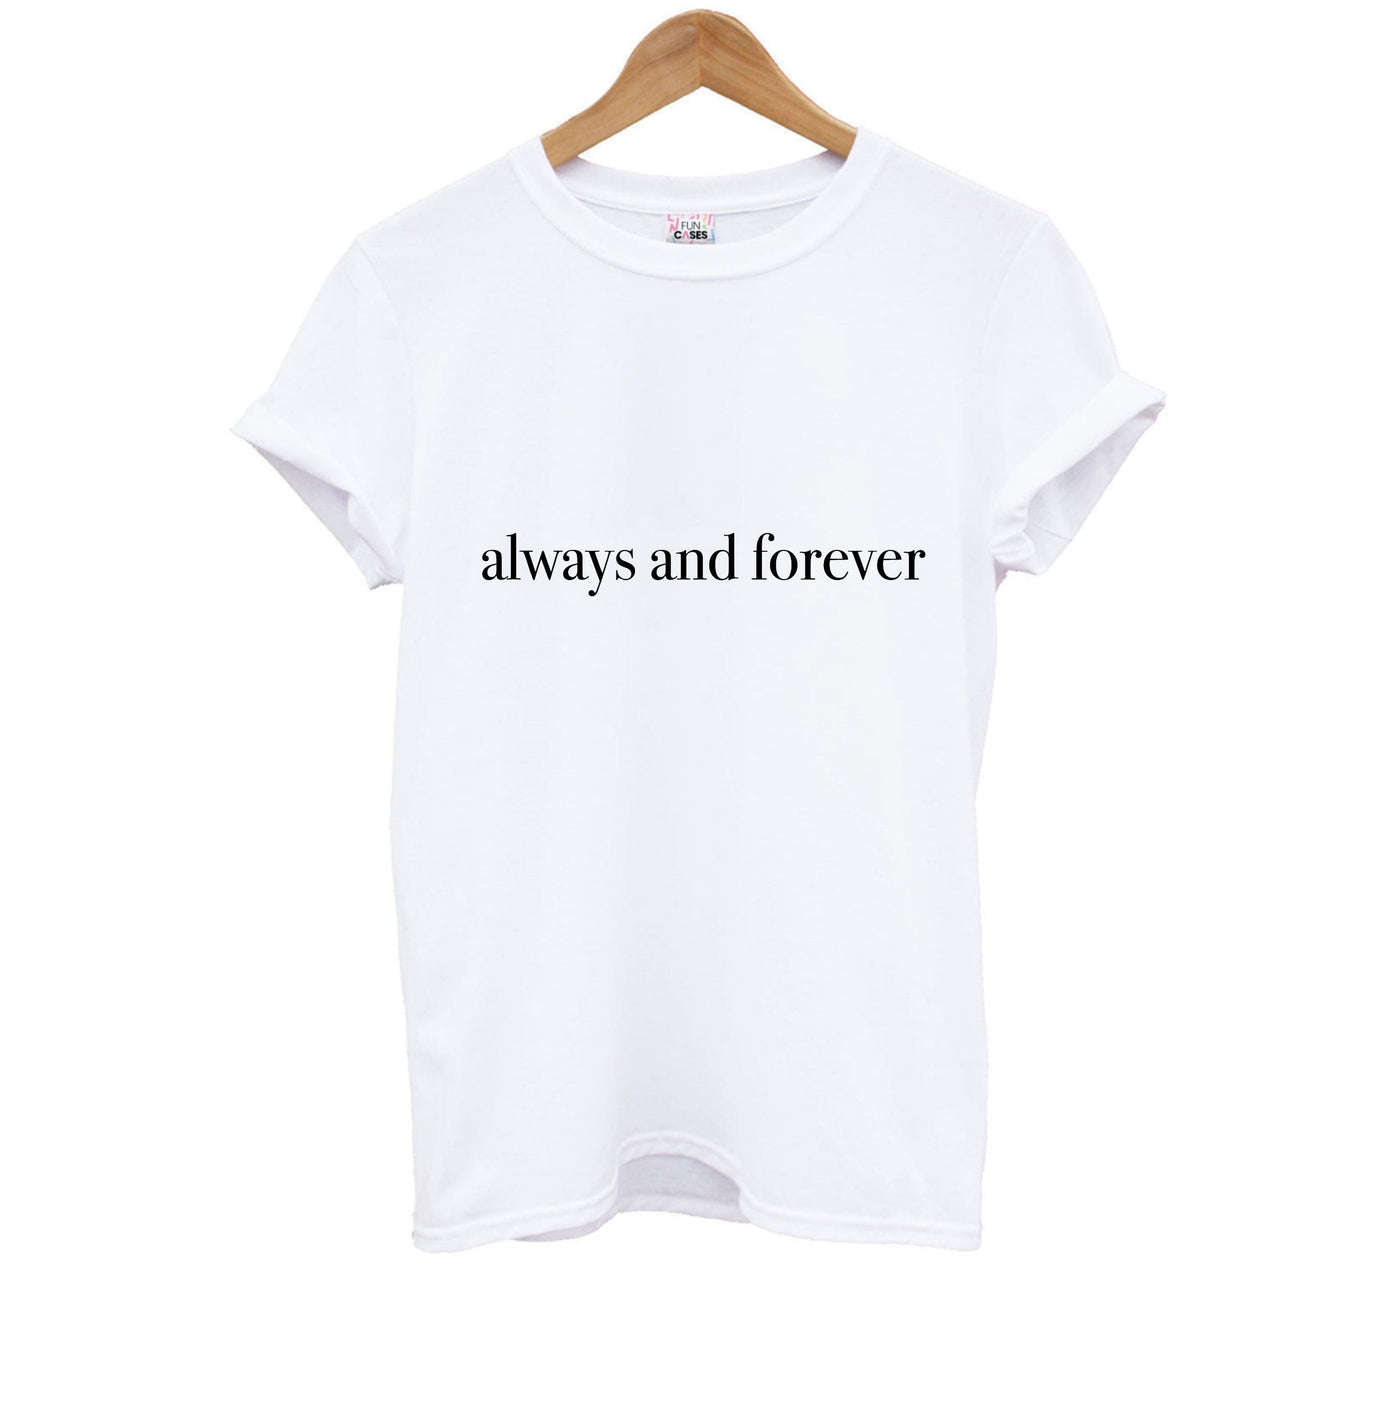 Always And Forever - The Originals Kids T-Shirt